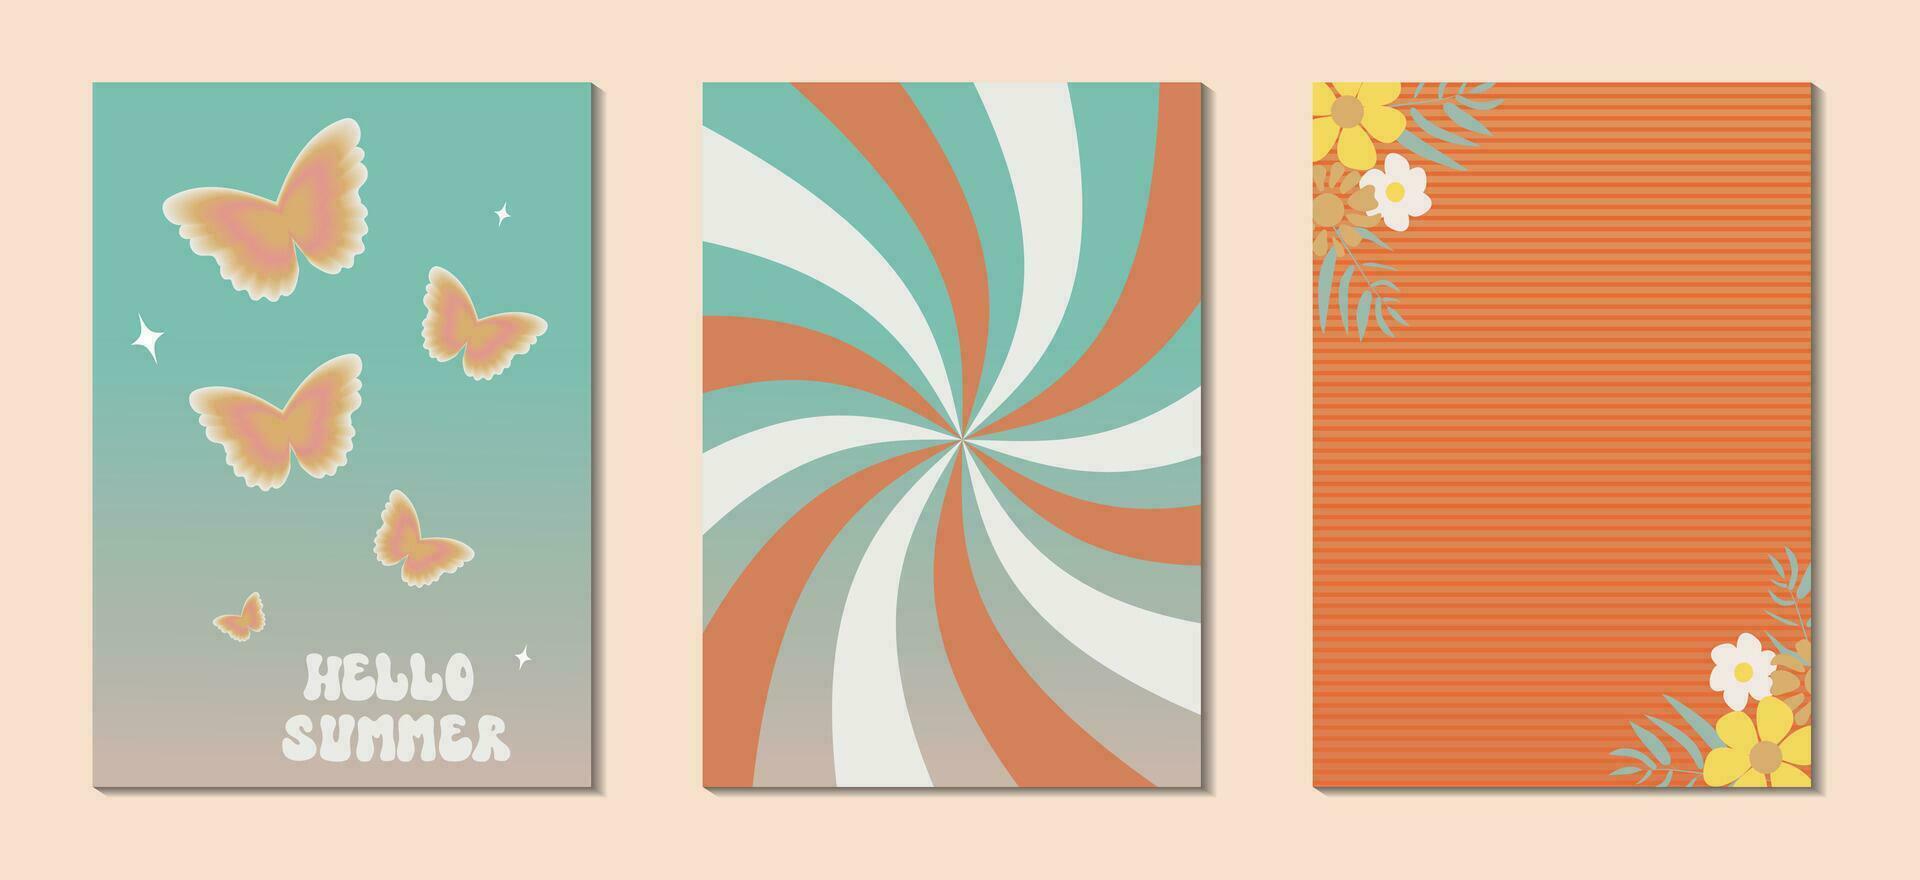 Groovy 70s backgrounds . Hippie Aesthetic. Posters in the style of 70s retro groovy with lettering, butterflies, sun , palms, texture etc.. Vector illustration